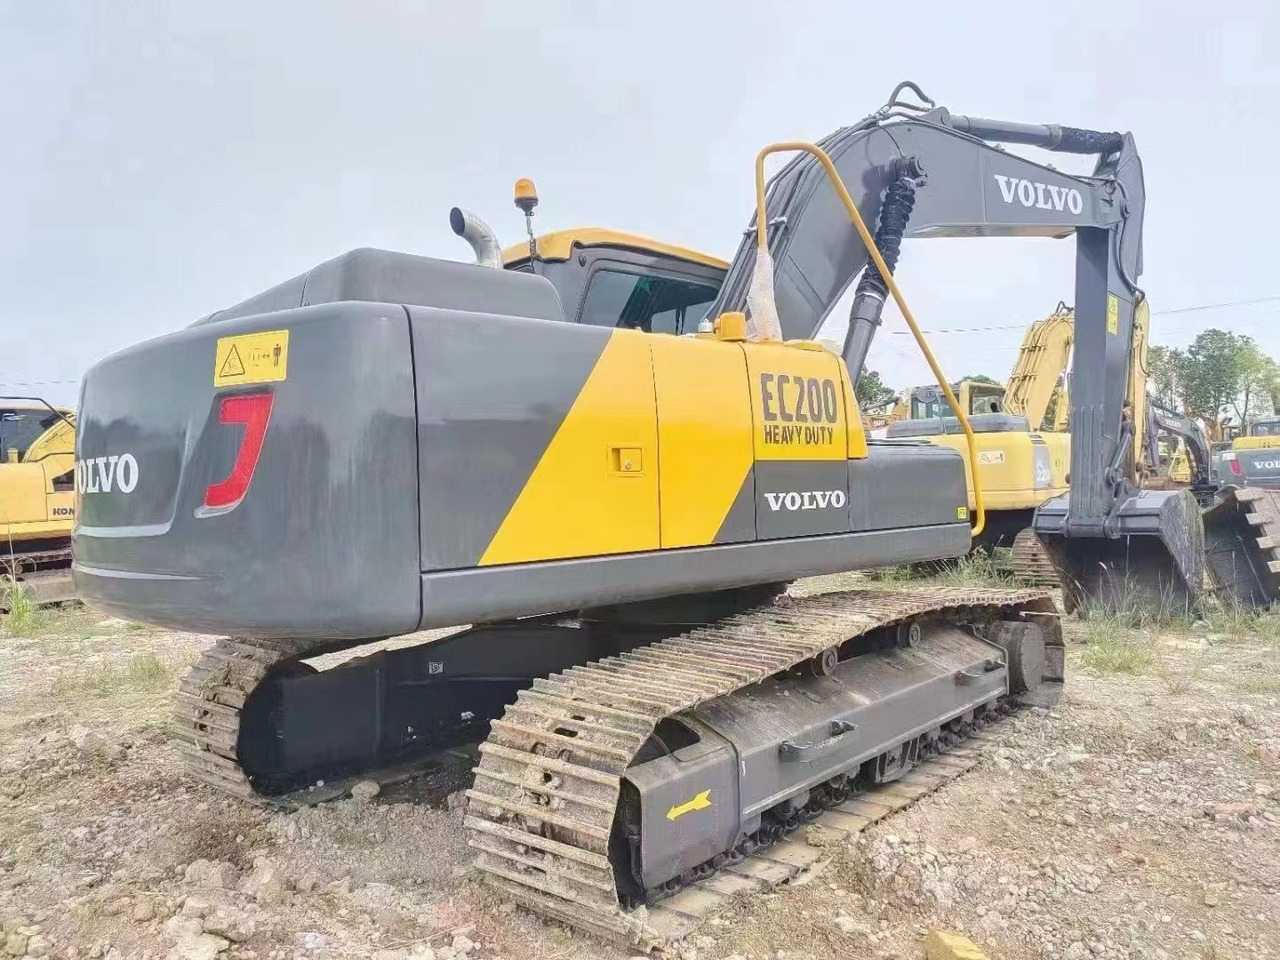 Used excavator VOLVO EC200, Large engineering construction machinery good condition on sale lizingą Used excavator VOLVO EC200, Large engineering construction machinery good condition on sale: foto 4